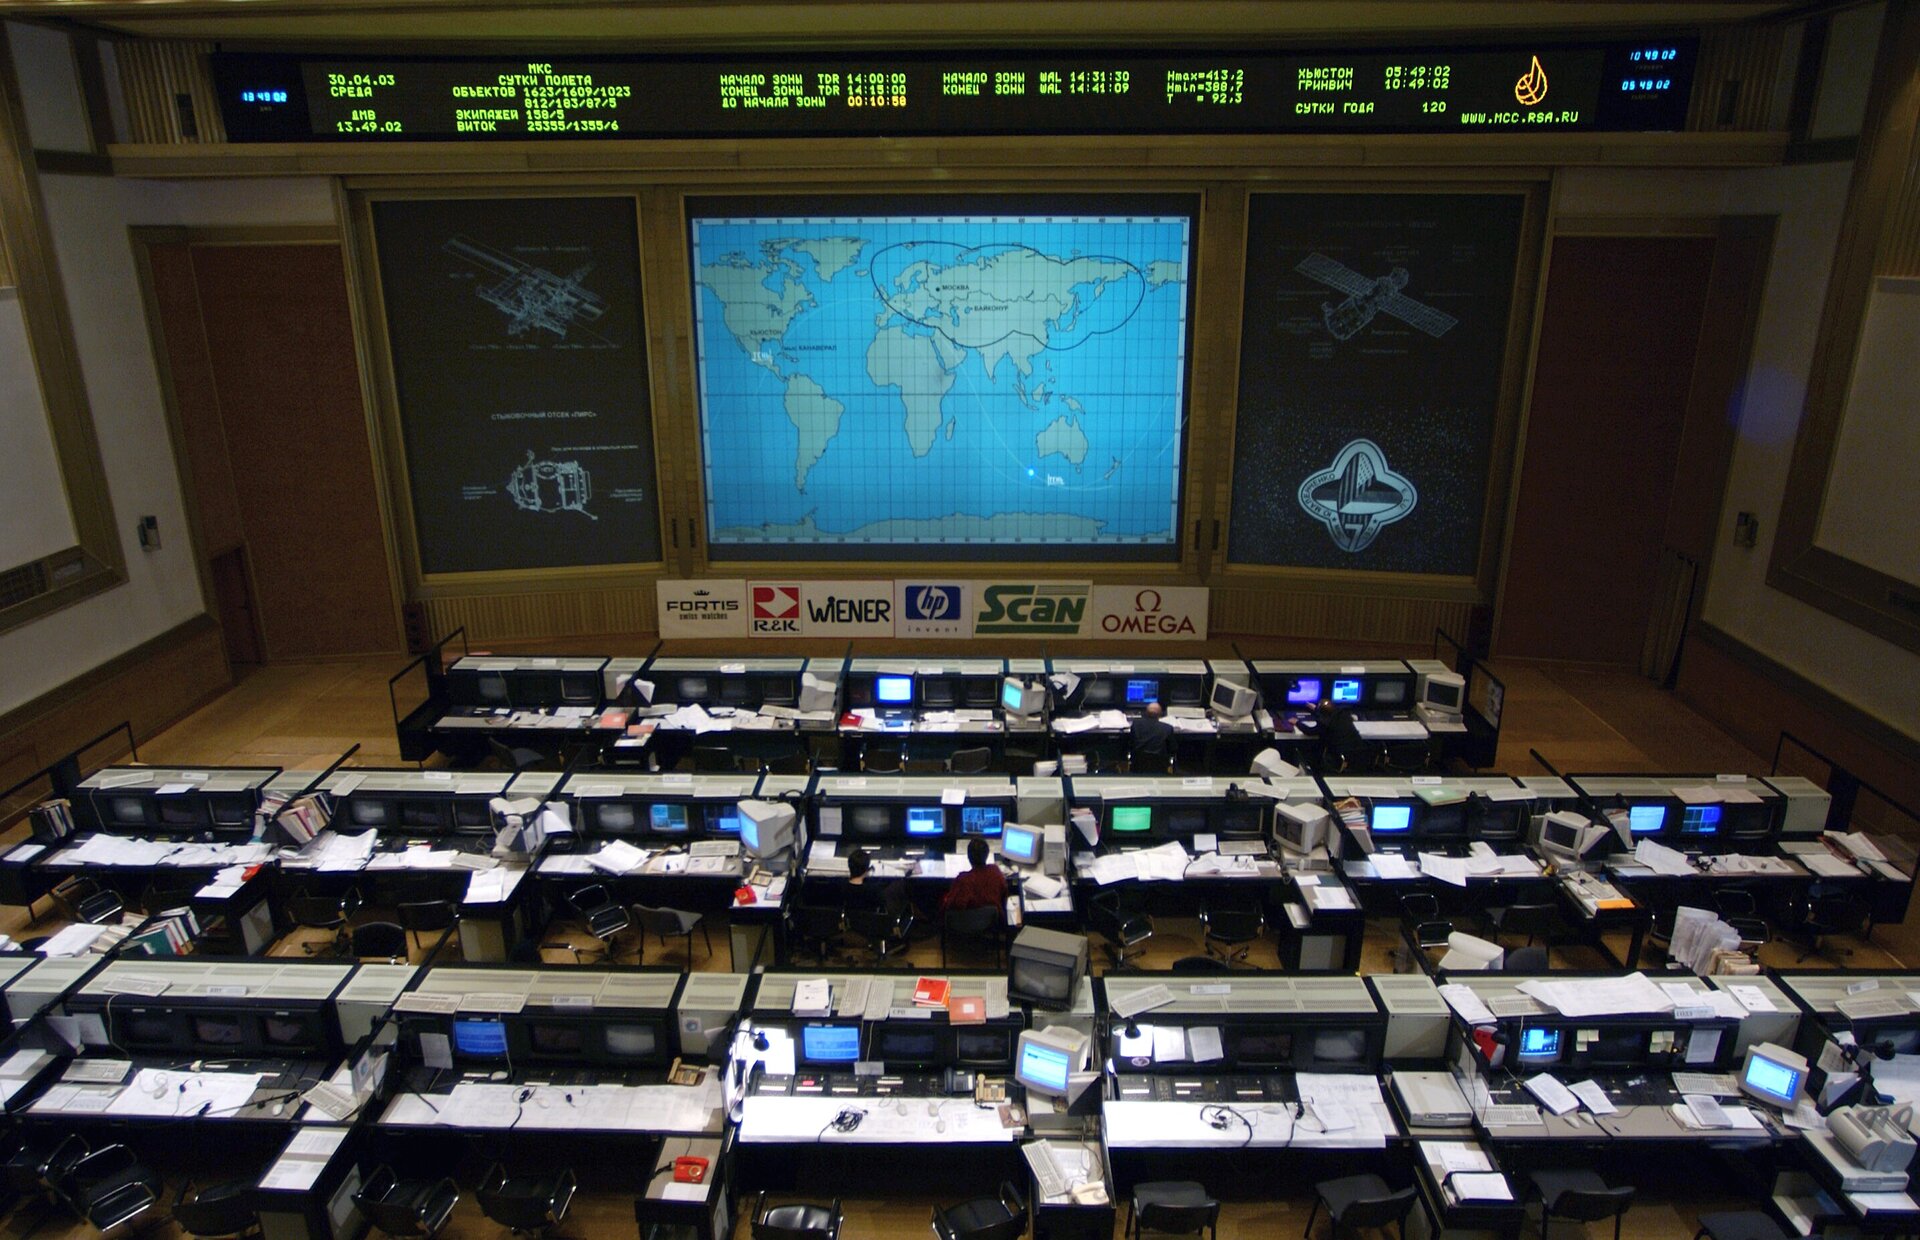 Mission control centre in Moscow